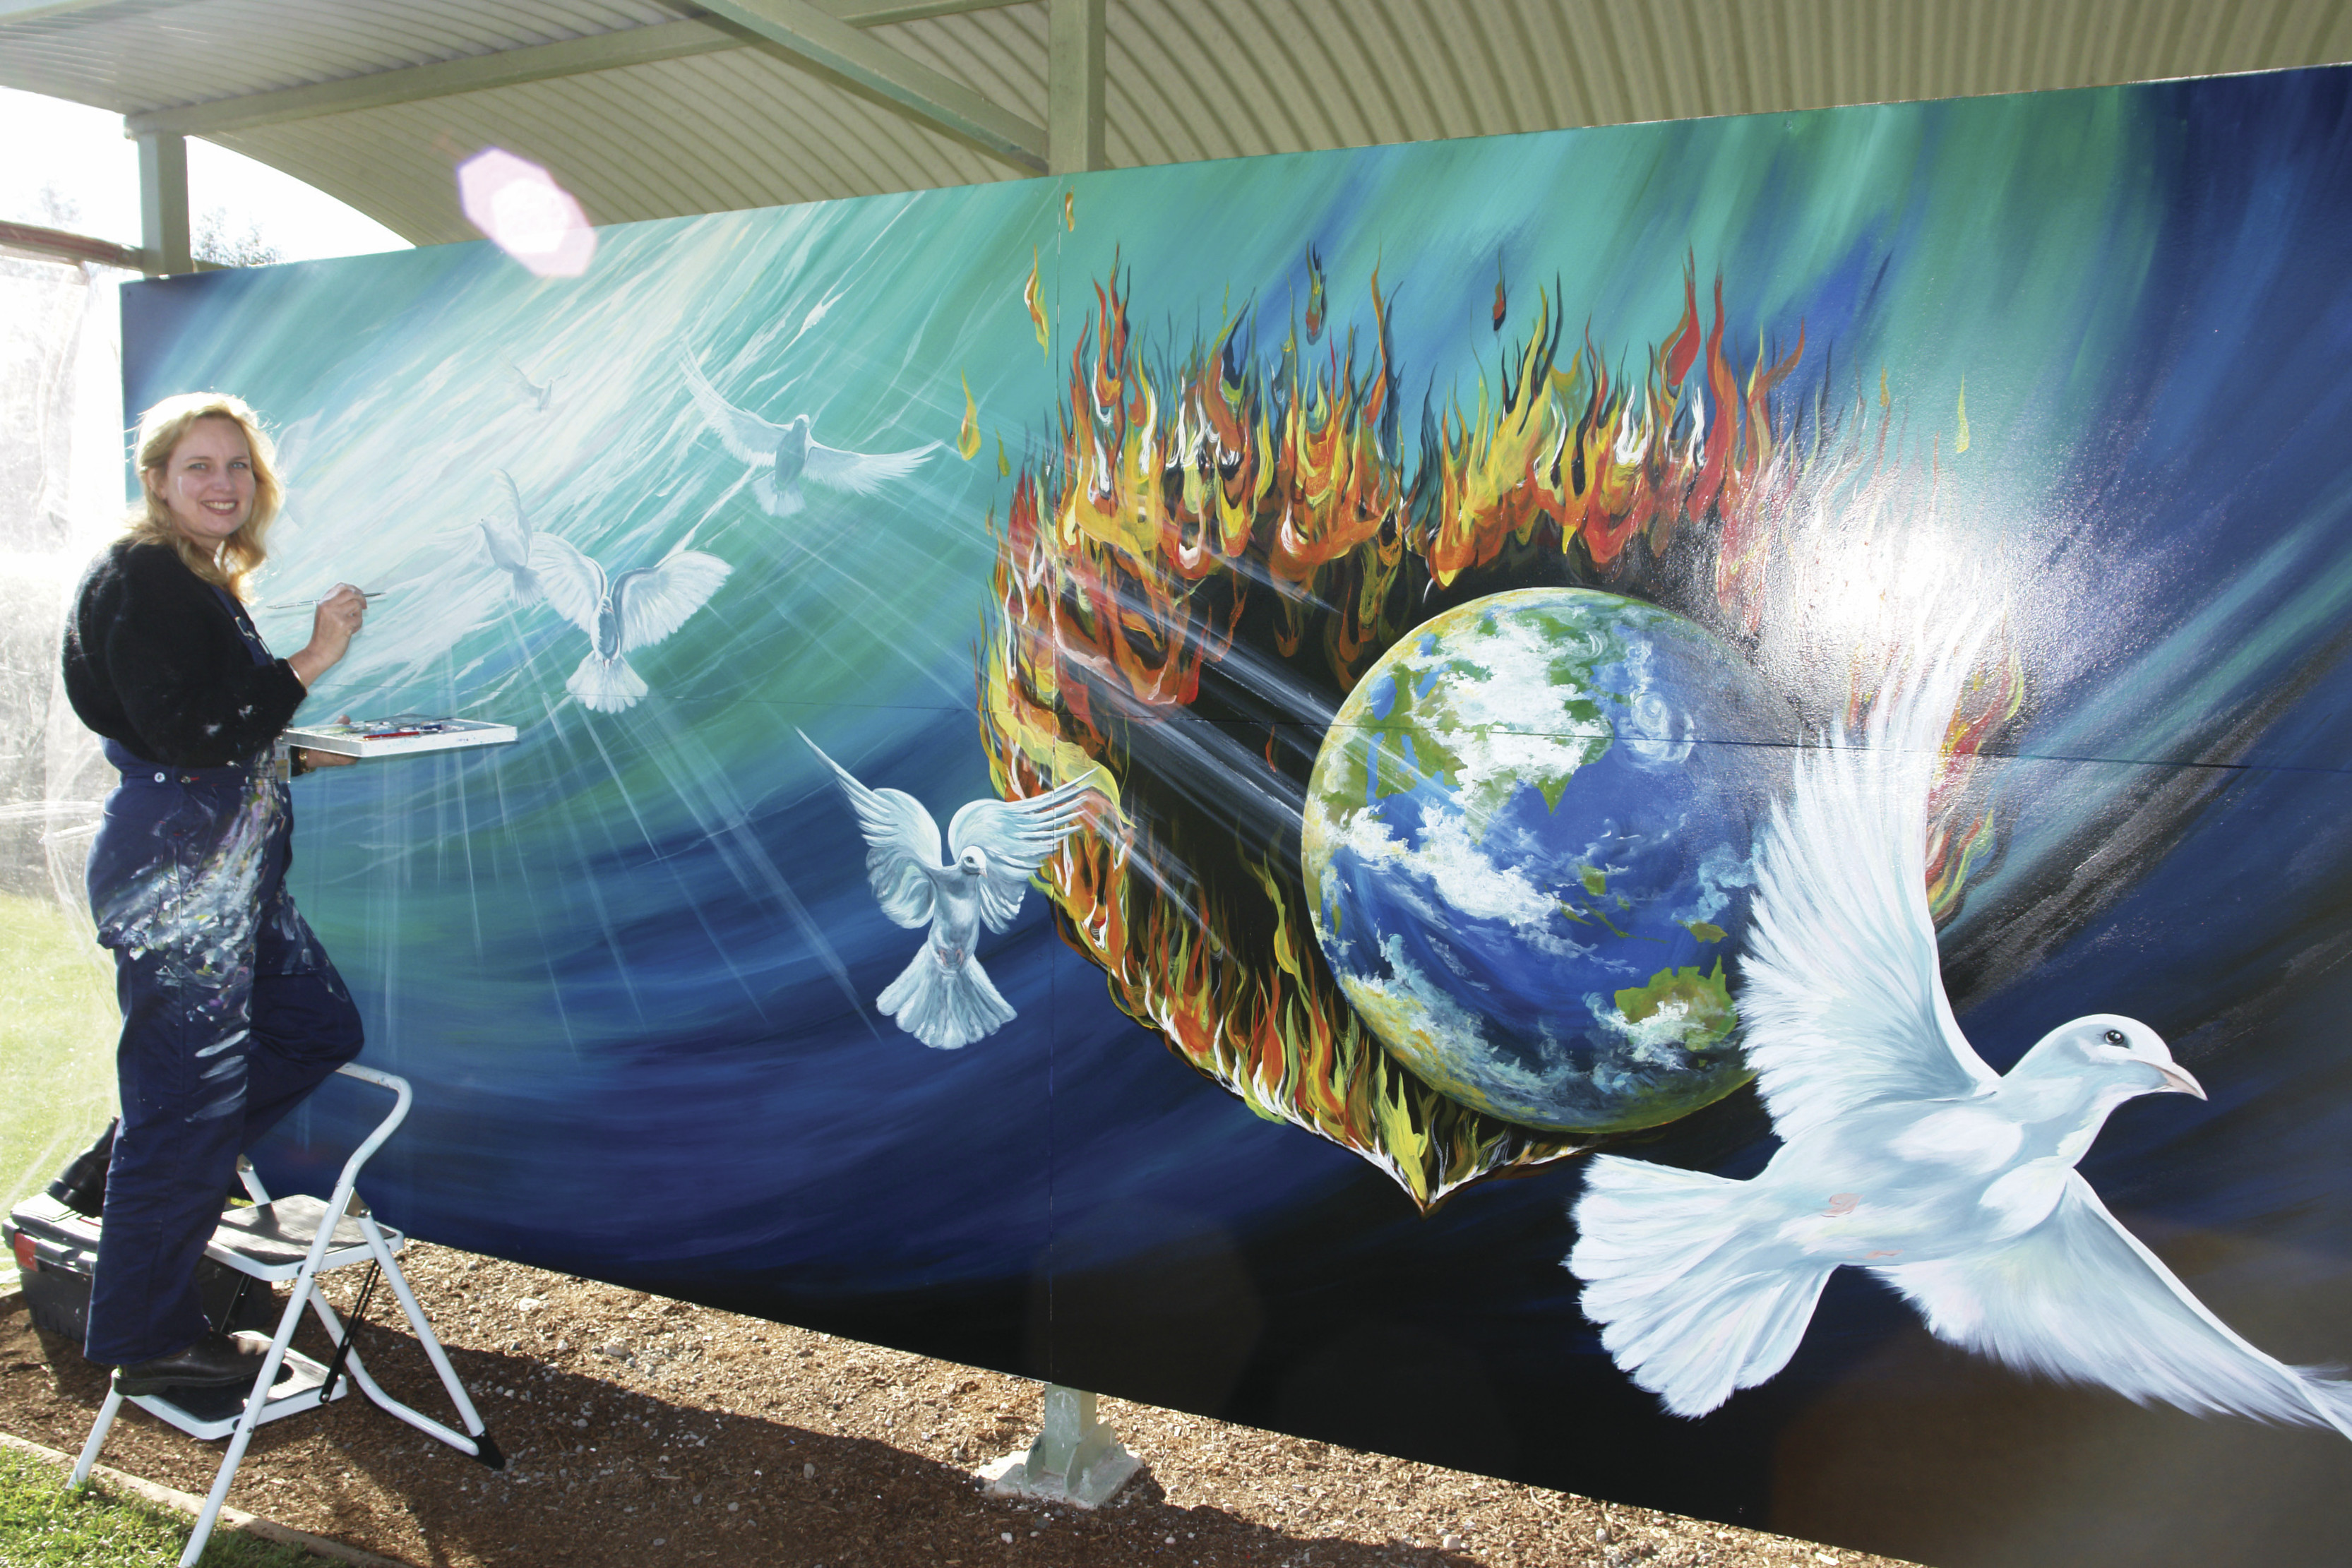 Lady Painting an amazing mural of the planet surrounded by fire, the ocean and birds, as part of the International Mural Fest.